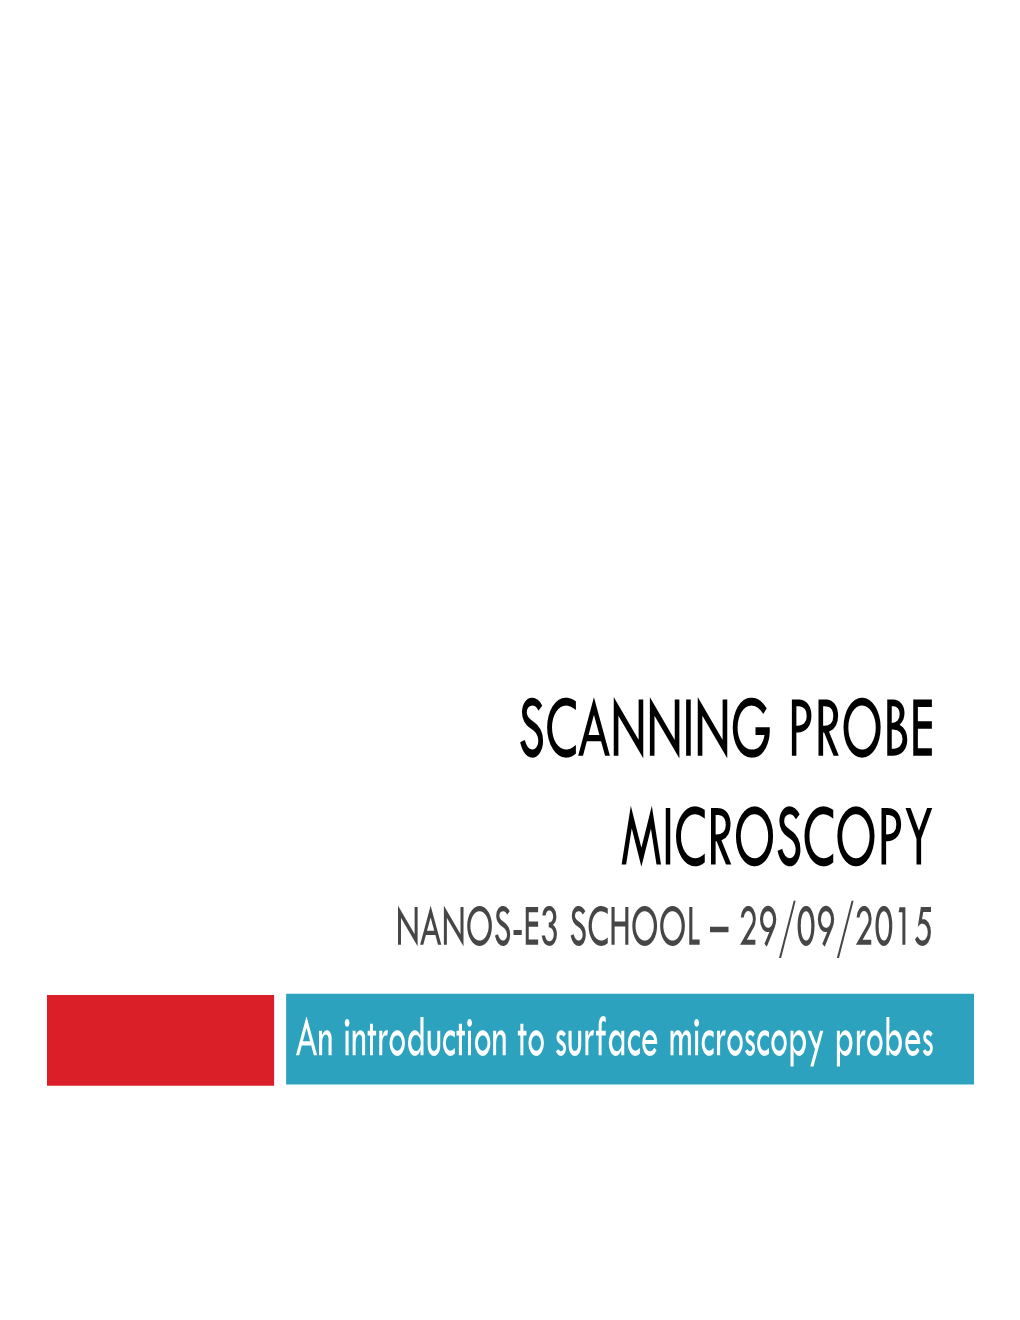 SCANNING PROBE MICROSCOPY NANOS-E3 SCHOOL – 29/09/2015 an Introduction to Surface Microscopy Probes SPM Is Ubiquitous in Modern Research